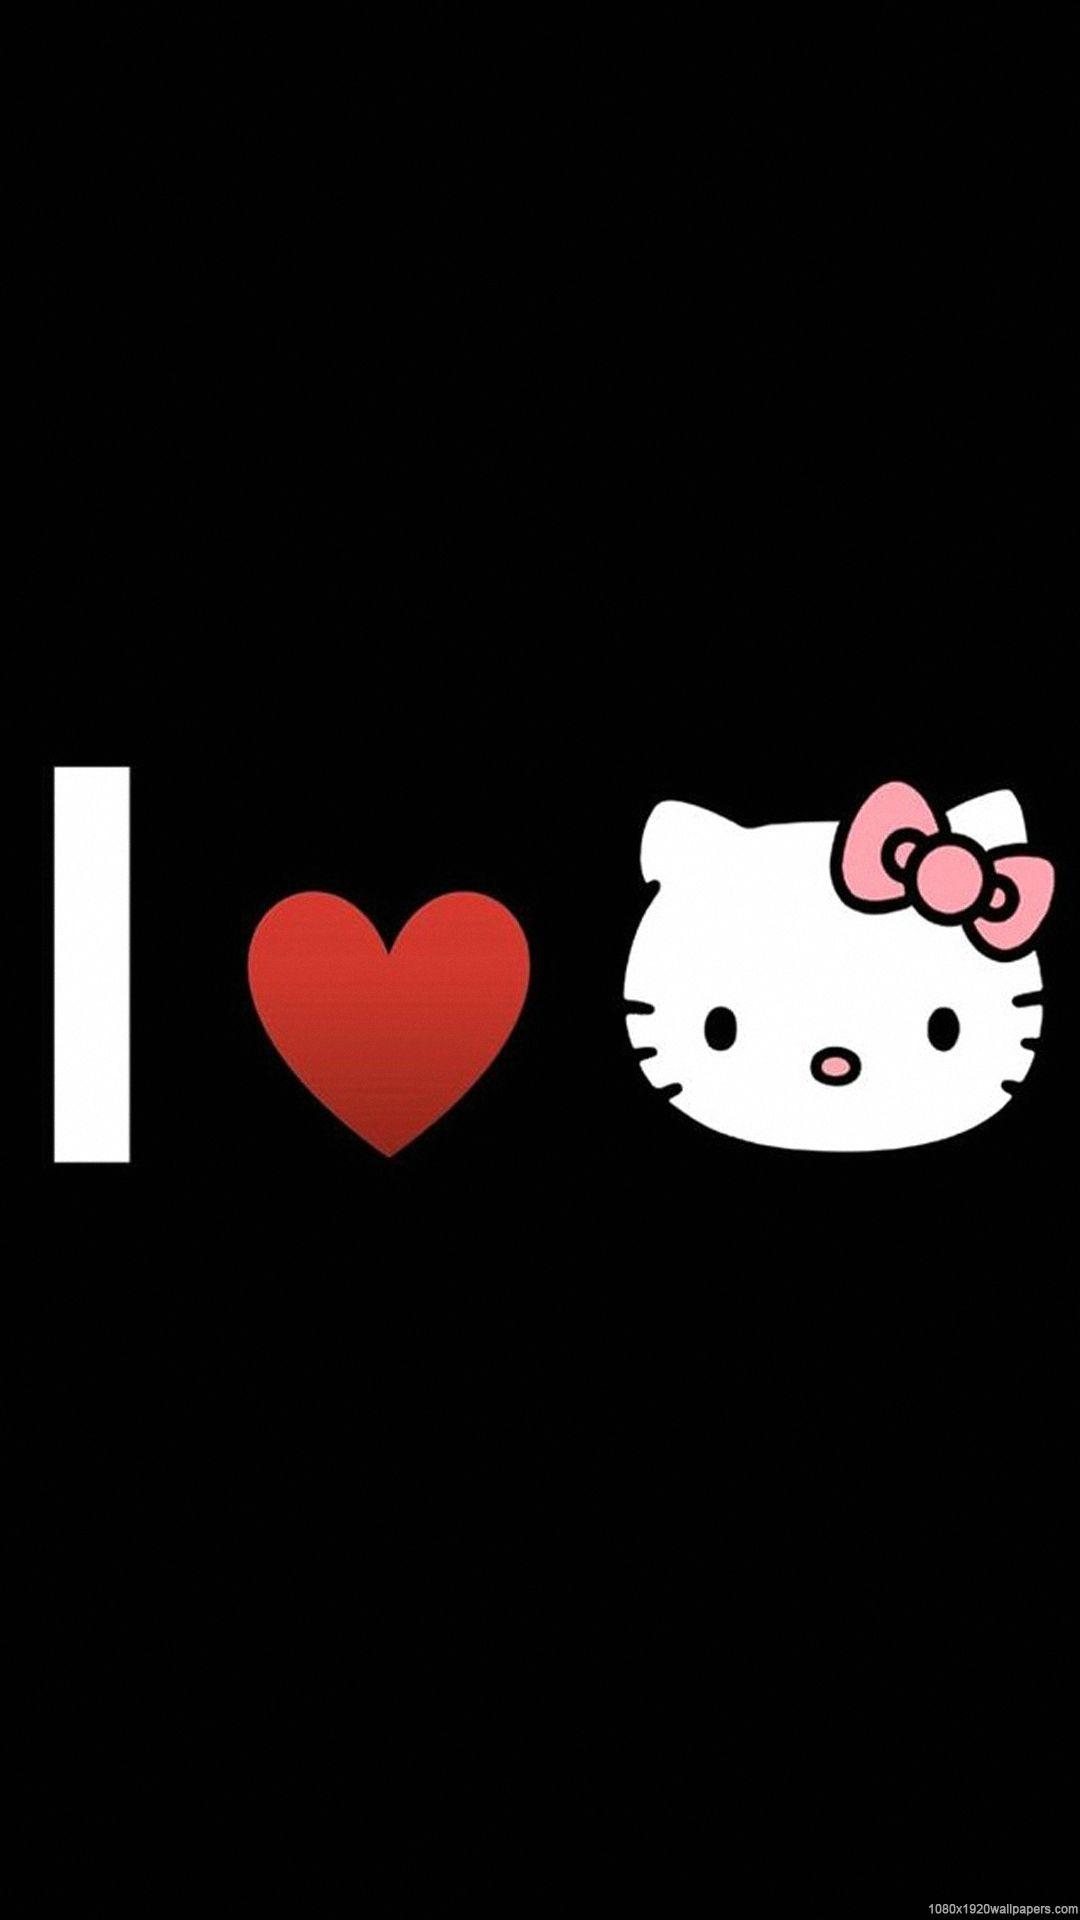 Wallpapers Hello Kitty Black - Wallpaper Cave